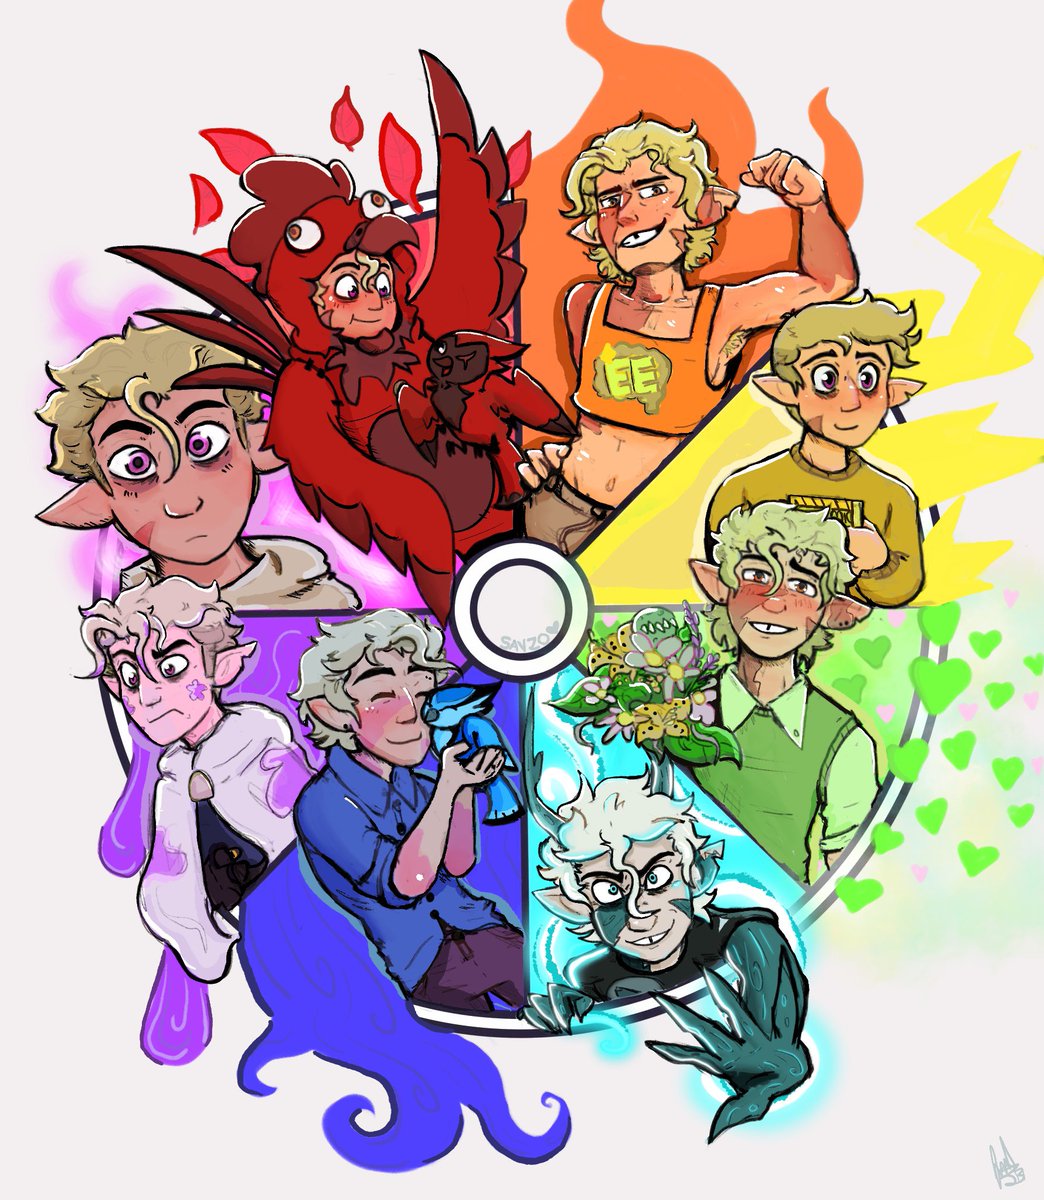 I was gonna clean up the lines but honestly fell for the sketchy look. Heres my color Hunter Color Wheel!  #TheOwlHouse #toh #huntertoh #HunterDeamonne #HunterNoceda #Hunter #thegoldenguard #theowlhousefanart #colorwheel #colorwheelchallange #thebestboy #flapjack #waffles